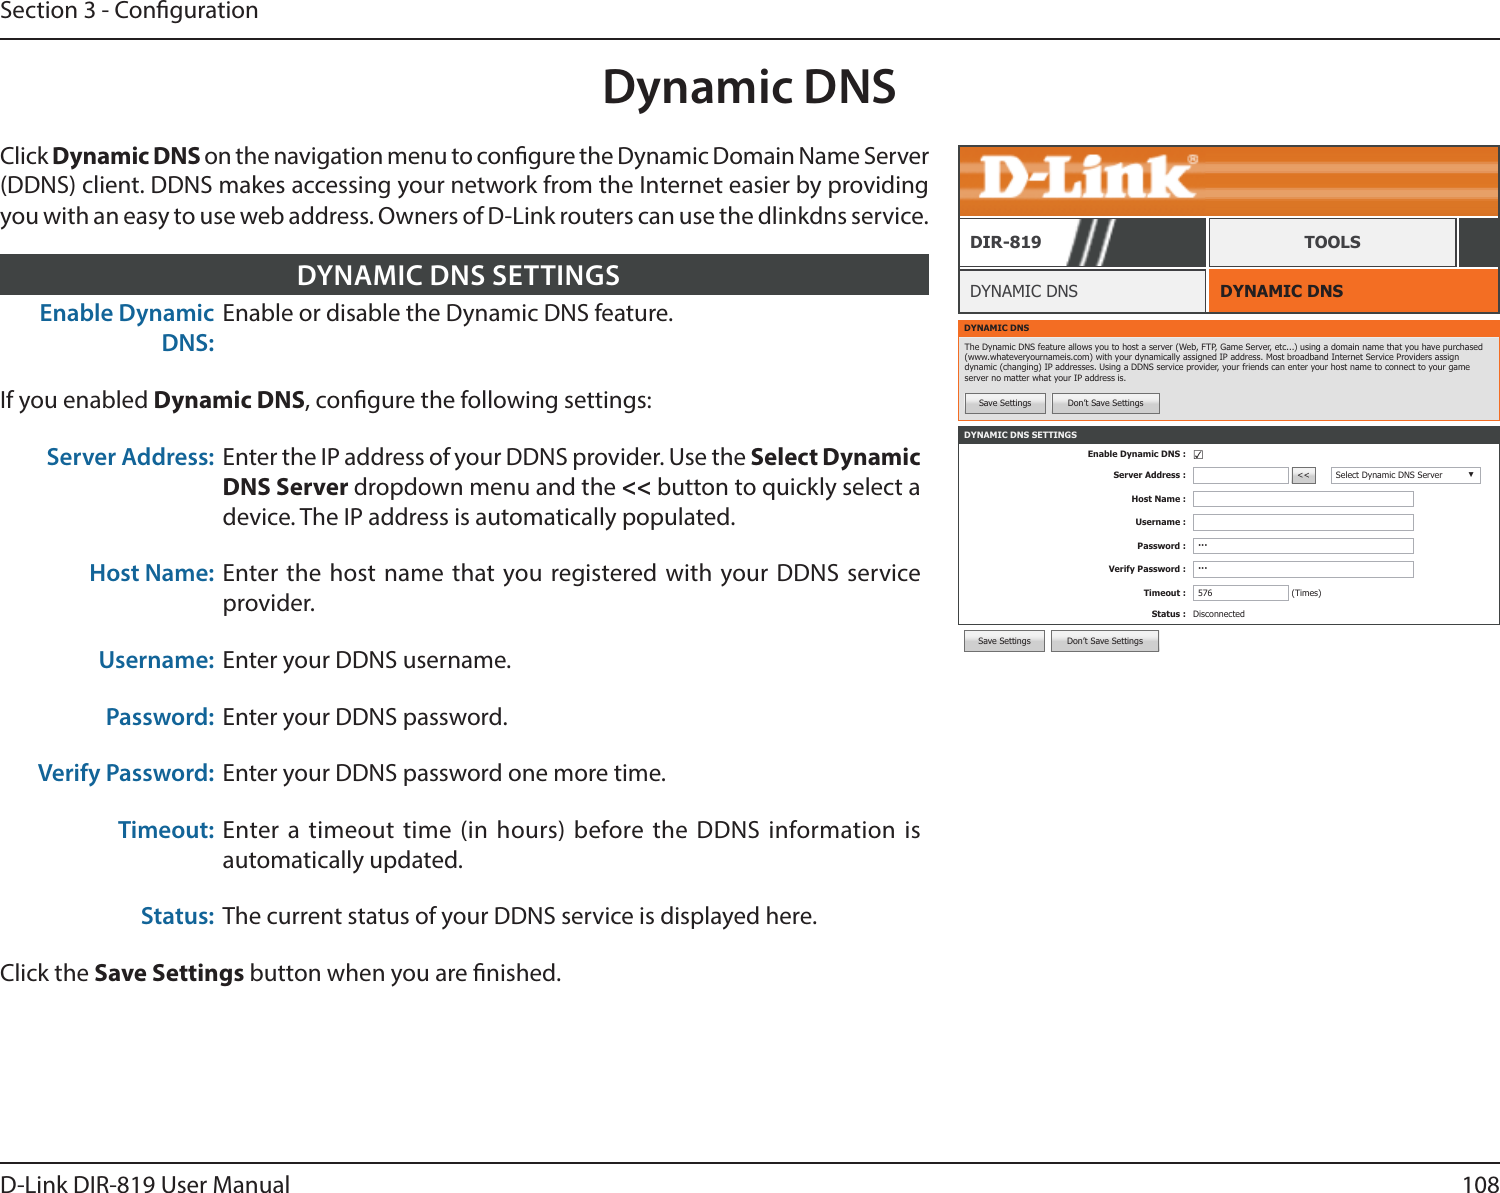 108D-Link DIR-819 User ManualSection 3 - CongurationDynamic DNSDYNAMIC DNSDYNAMIC DNSDIR-819 TOOLSClick Dynamic DNS on the navigation menu to congure the Dynamic Domain Name Server (DDNS) client. DDNS makes accessing your network from the Internet easier by providing you with an easy to use web address. Owners of D-Link routers can use the dlinkdns service.Enable Dynamic DNS:Enable or disable the Dynamic DNS feature.If you enabled Dynamic DNS, congure the following settings:Server Address: Enter the IP address of your DDNS provider. Use the Select Dynamic DNS Server dropdown menu and the &lt;&lt; button to quickly select a device. The IP address is automatically populated.Host Name: Enter the host name that you registered with your DDNS service provider.Username: Enter your DDNS username.Password: Enter your DDNS password.Verify Password: Enter your DDNS password one more time.Timeout: Enter a timeout time (in hours) before the DDNS information is automatically updated.Status: The current status of your DDNS service is displayed here.Click the Save Settings button when you are nished.DYNAMIC DNS SETTINGSDYNAMIC DNSThe Dynamic DNS feature allows you to host a server (Web, FTP, Game Server, etc...) using a domain name that you have purchased (www.whateveryournameis.com) with your dynamically assigned IP address. Most broadband Internet Service Providers assign dynamic (changing) IP addresses. Using a DDNS service provider, your friends can enter your host name to connect to your game server no matter what your IP address is.Save Settings Don’t Save SettingsDYNAMIC DNS SETTINGSEnable Dynamic DNS : ☑Server Address : &lt;&lt; Select Dynamic DNS Server ▼Host Name :Username :Password : ···Verify Password : ···Timeout : 576 (Times)Status : DisconnectedSave Settings Don’t Save Settings